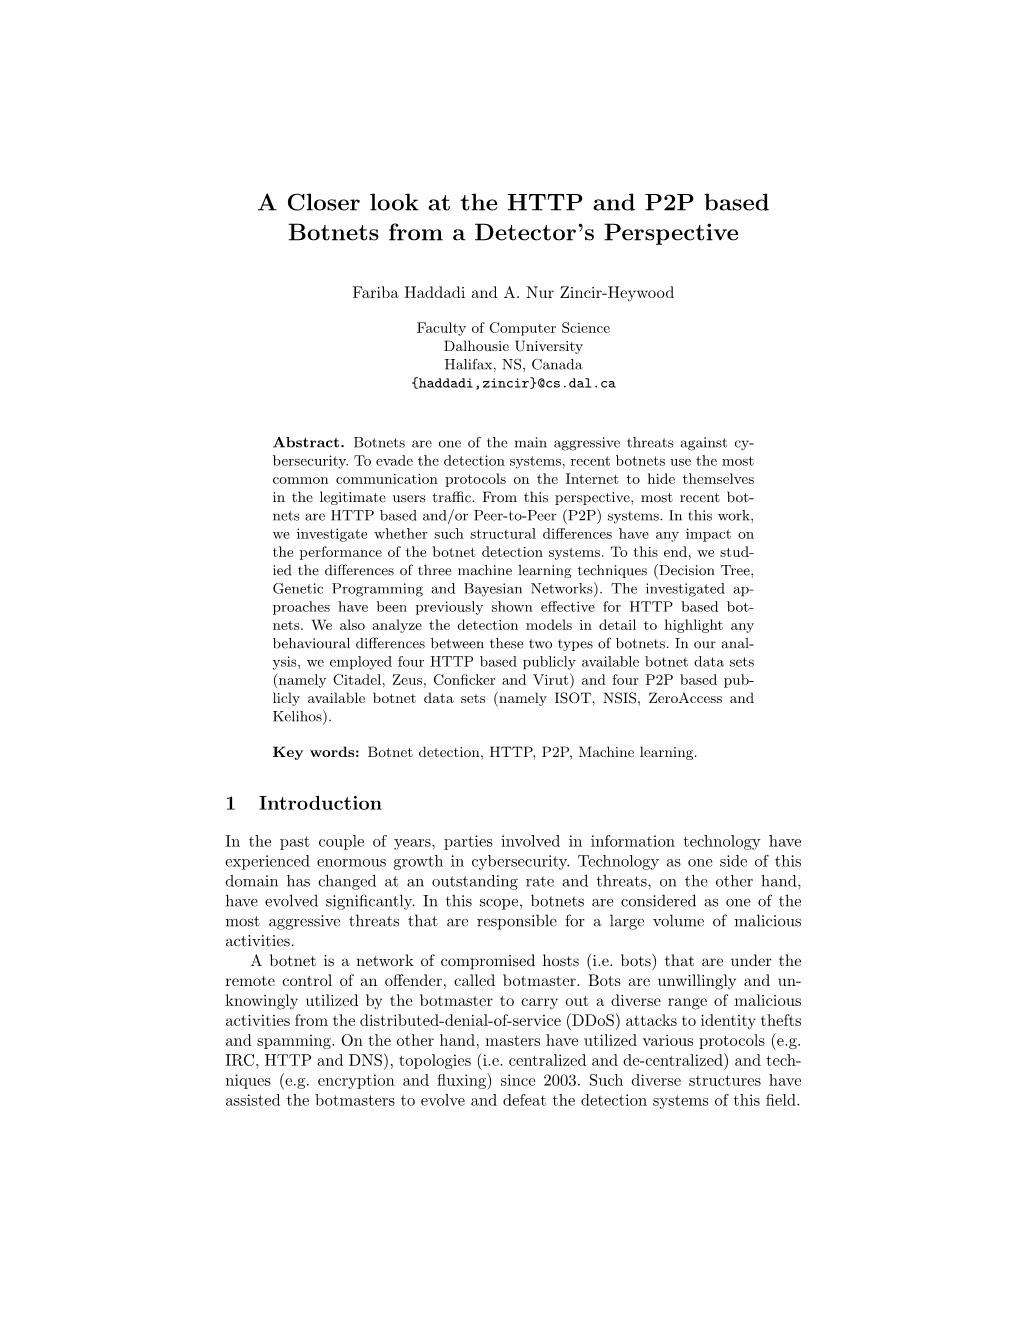 A Closer Look at the HTTP and P2P Based Botnets from a Detector's Perspective